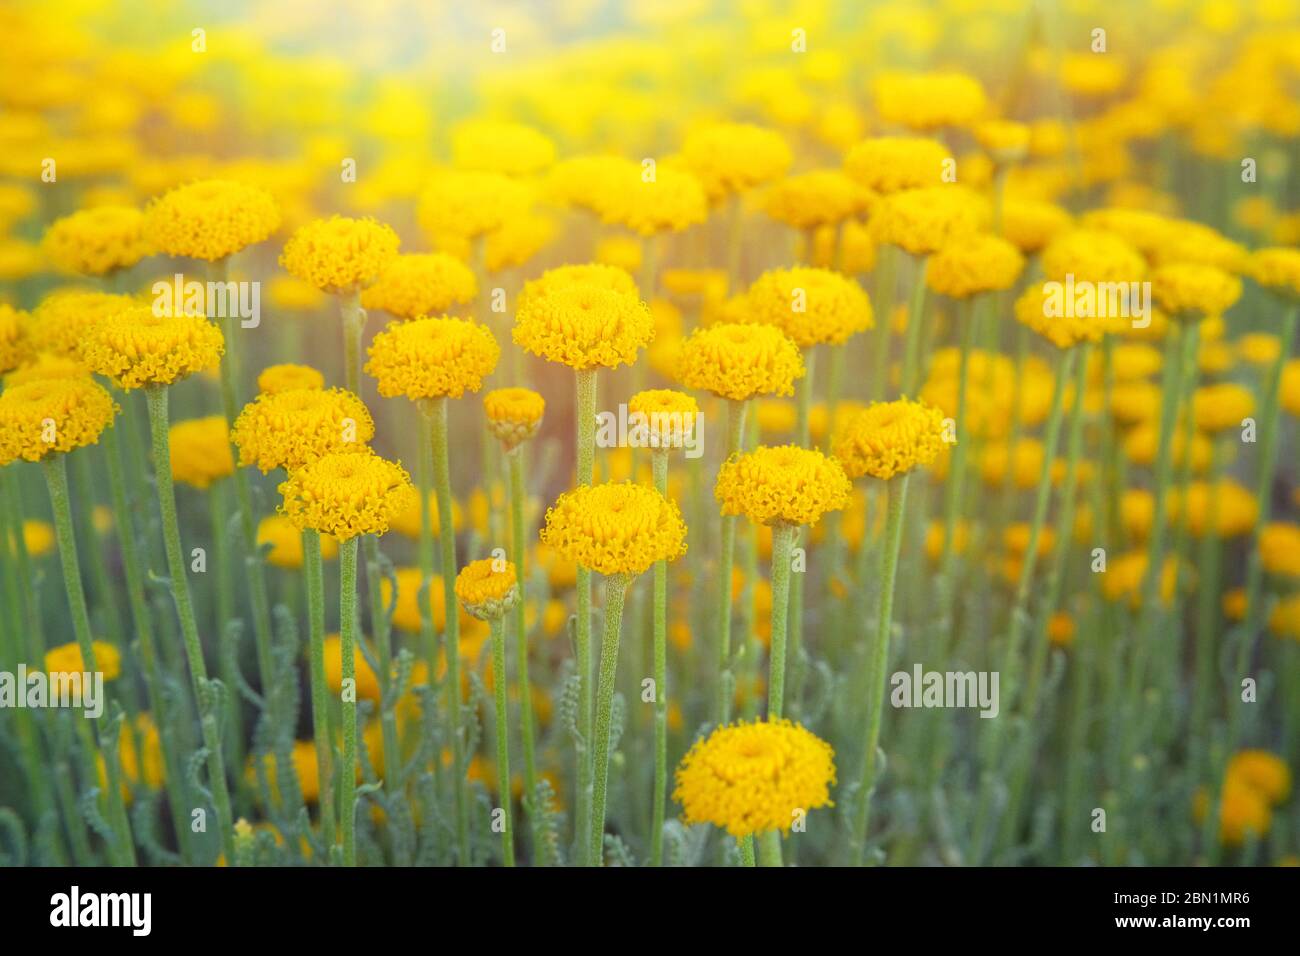 Helichrysum flowers on green nature blurred background. Many yellow flowers for herbalism cultivation in garden. Stock Photo